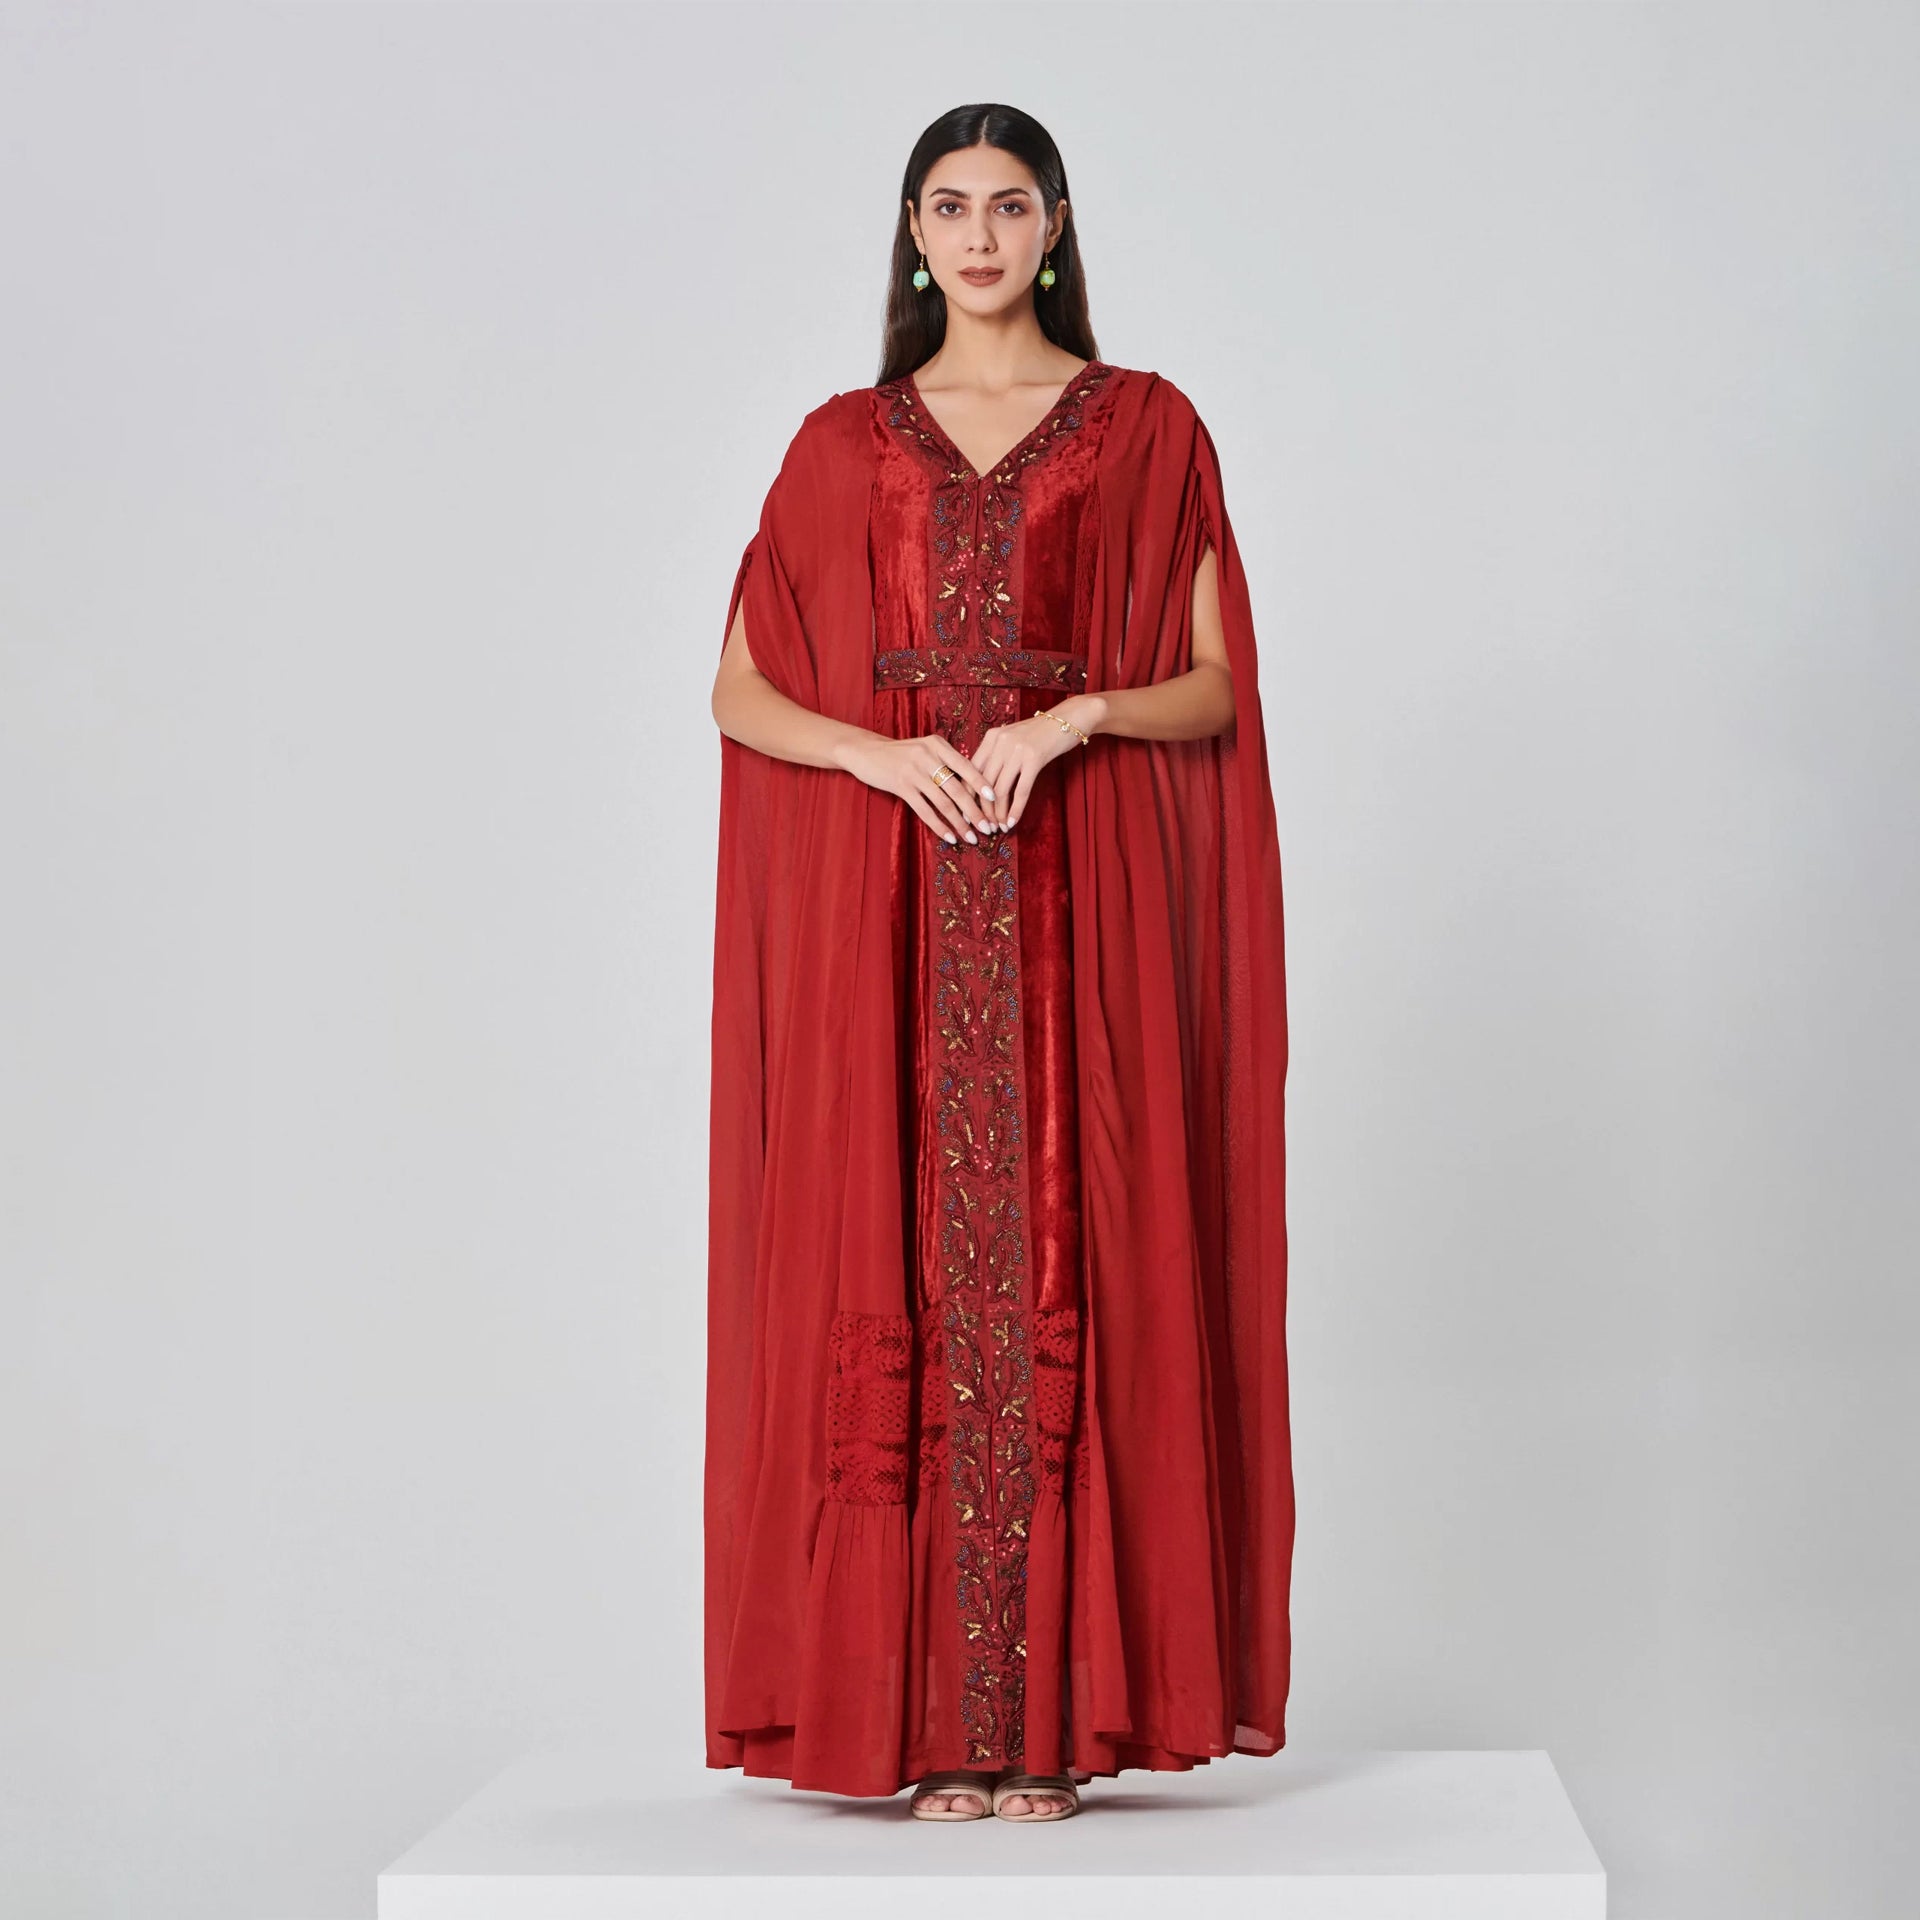 Burgundy Bisca Dress With Gold Embroidery From Shalky